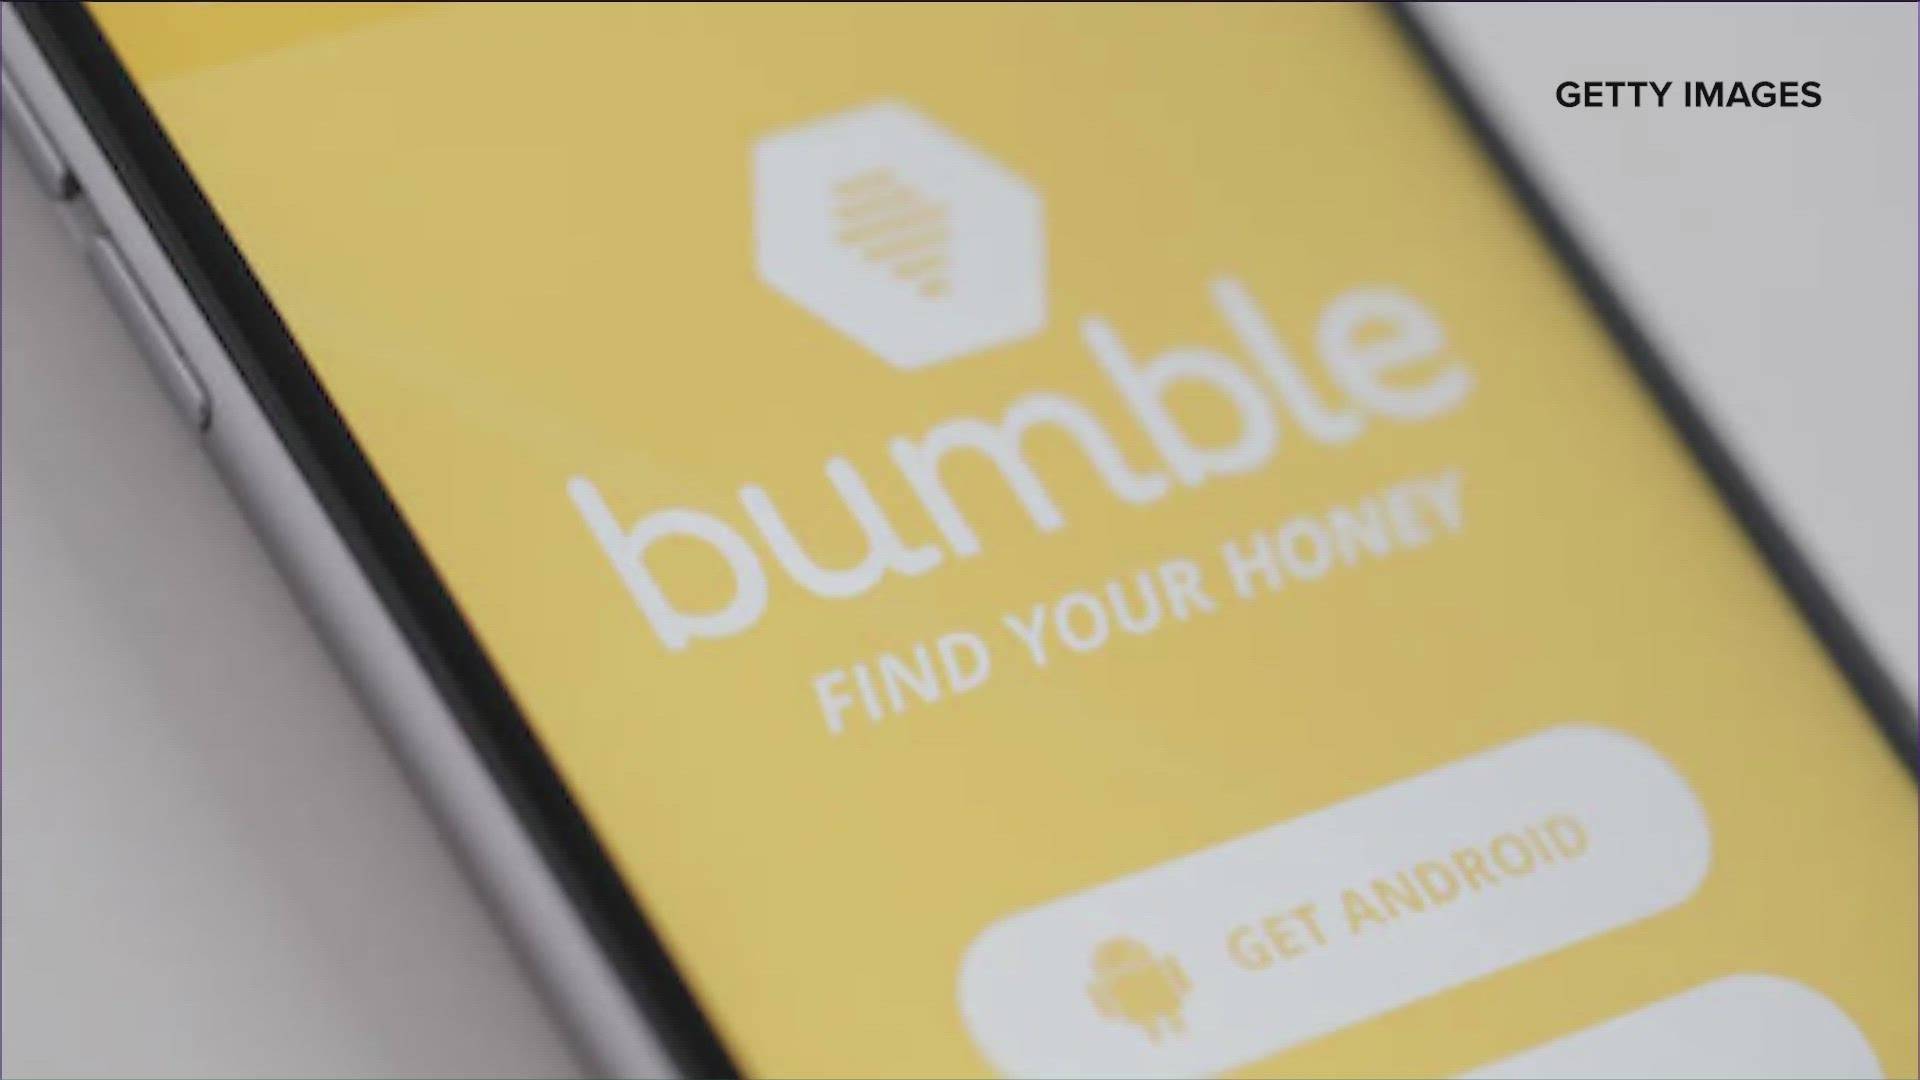 Bumble is laying off around 350 employees.